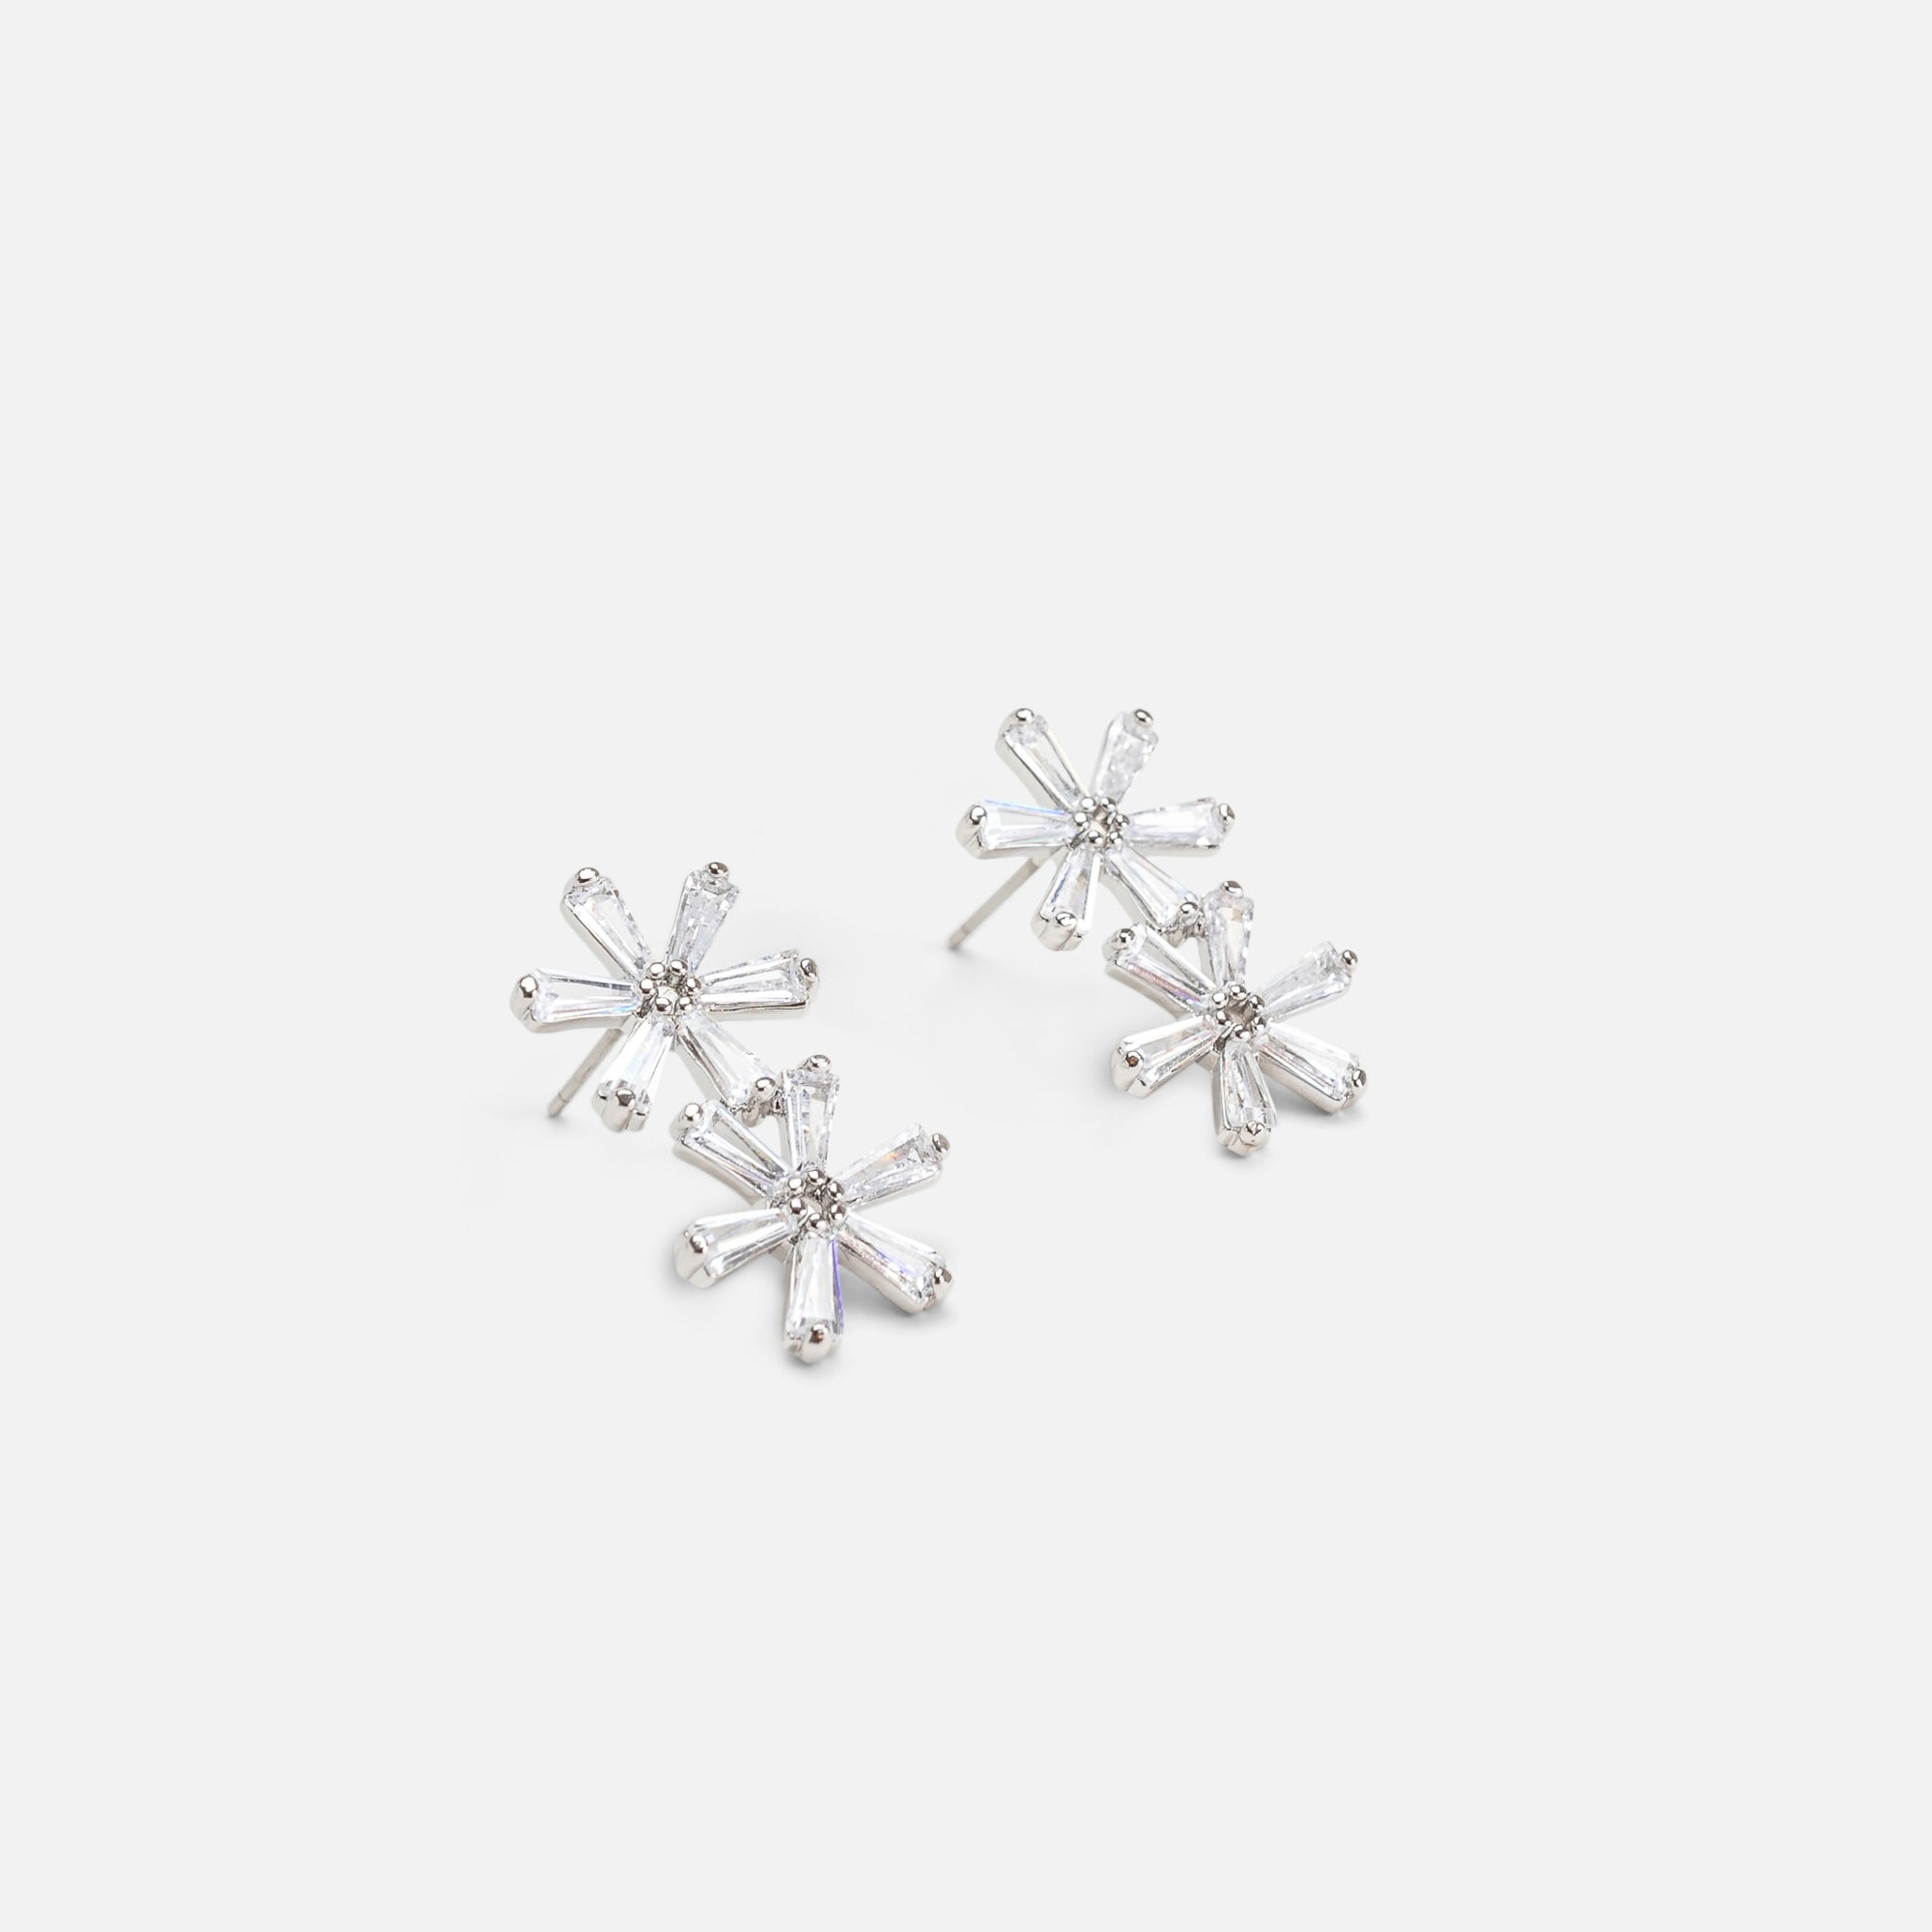 Silver earrings with small flowers